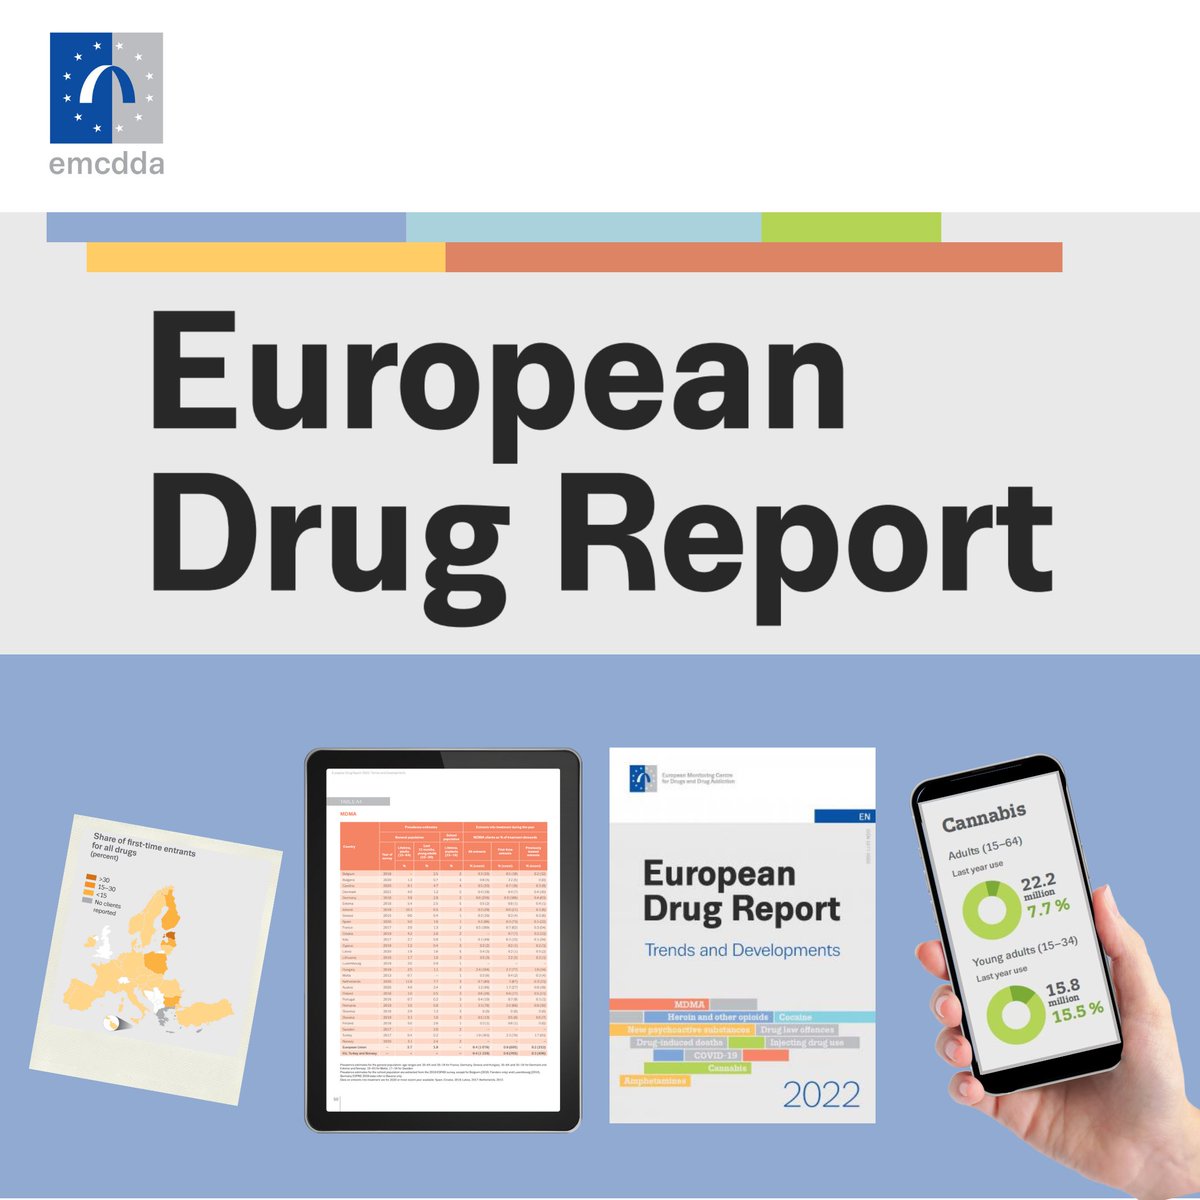 Today is #WorldDrugDay which focuses this year on #CareInCrises. Take a look at our #EuropeanDrugReport2022 and how ongoing global events may affect Europe's drugs problem. ow.ly/qyIZ50JGIMB